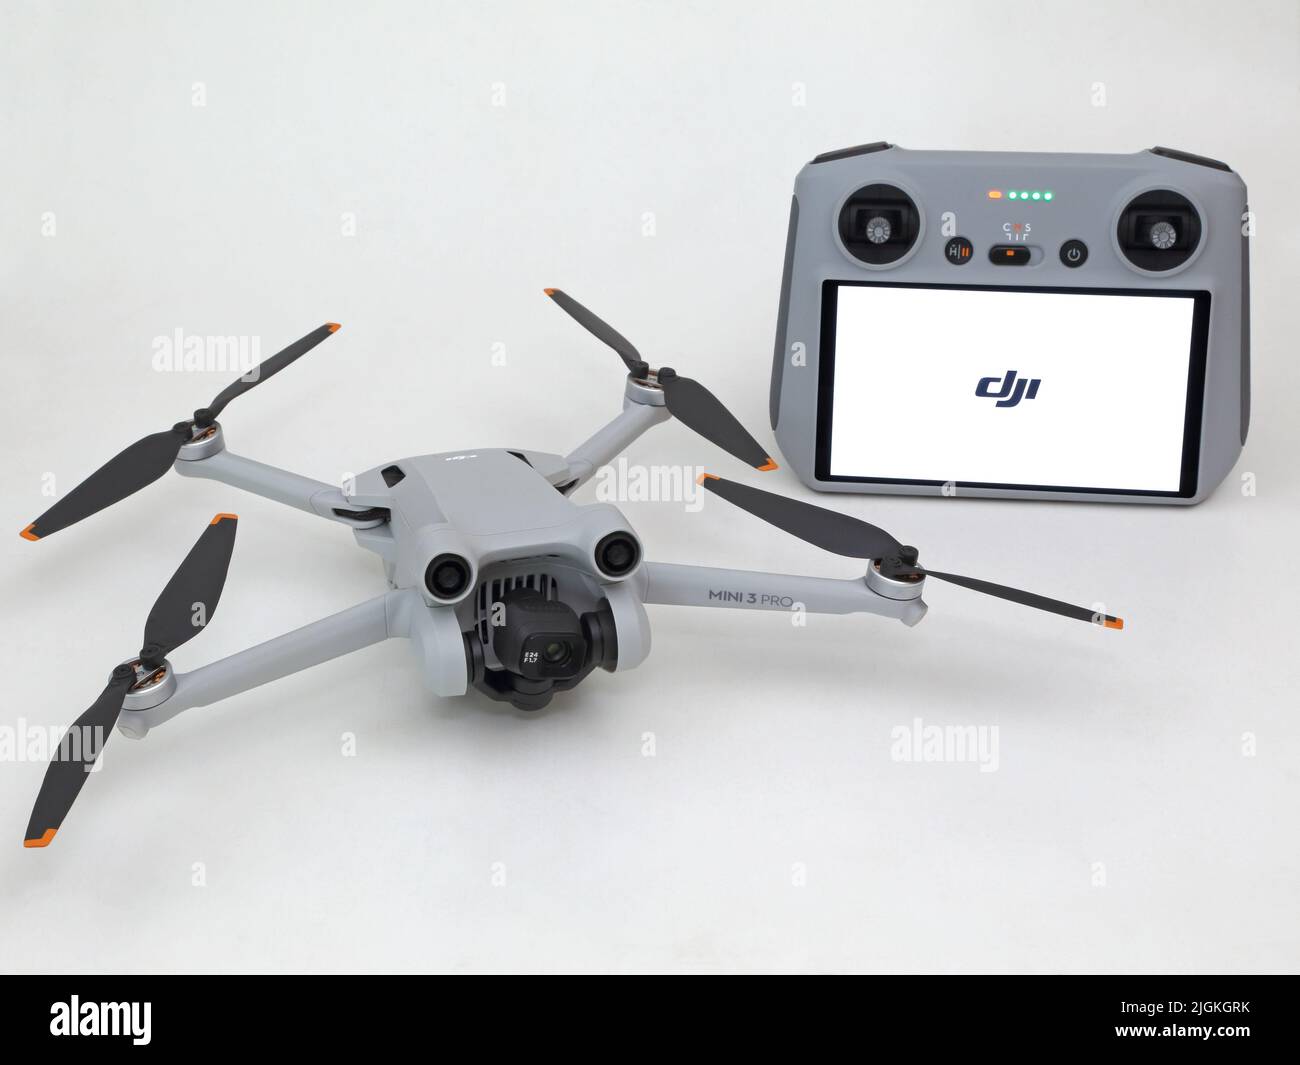 USA - July 8, 2022: A DJI Mini 3 Pro drone / UAV (unmanned aerial vehicle) and remote controller are shown up close, set against a white background. Stock Photo